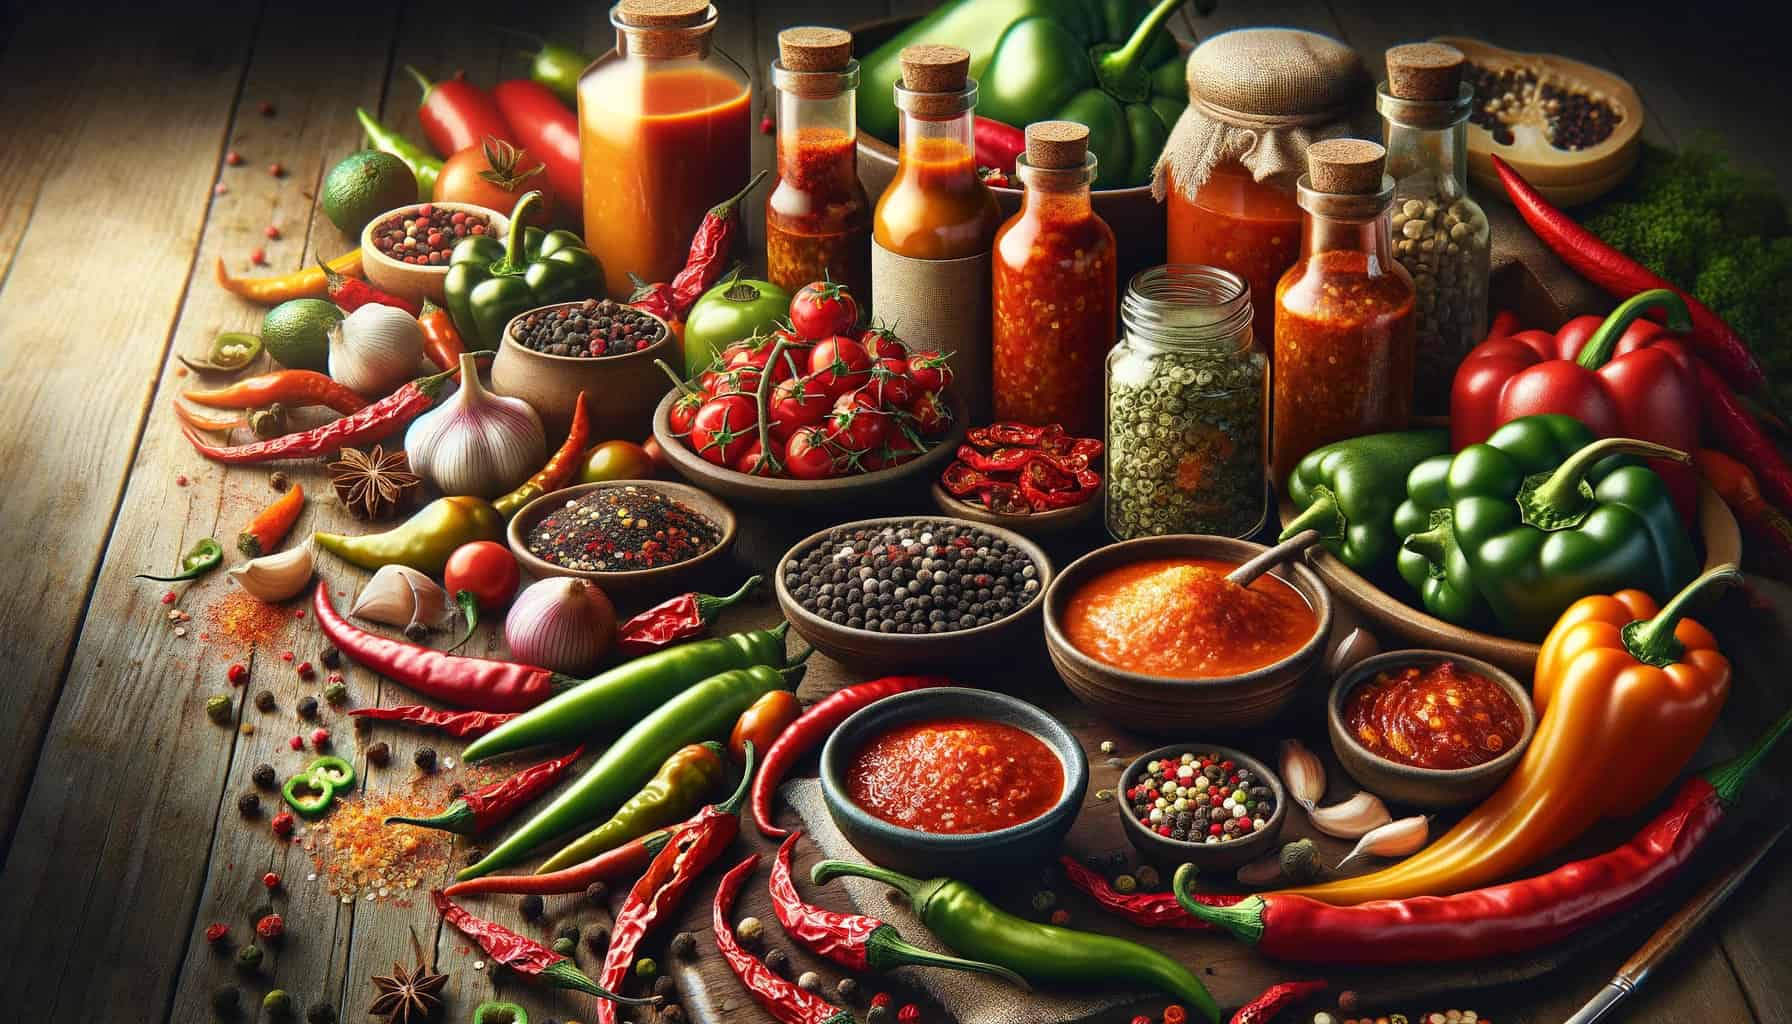 Spicy foods with capsaicin